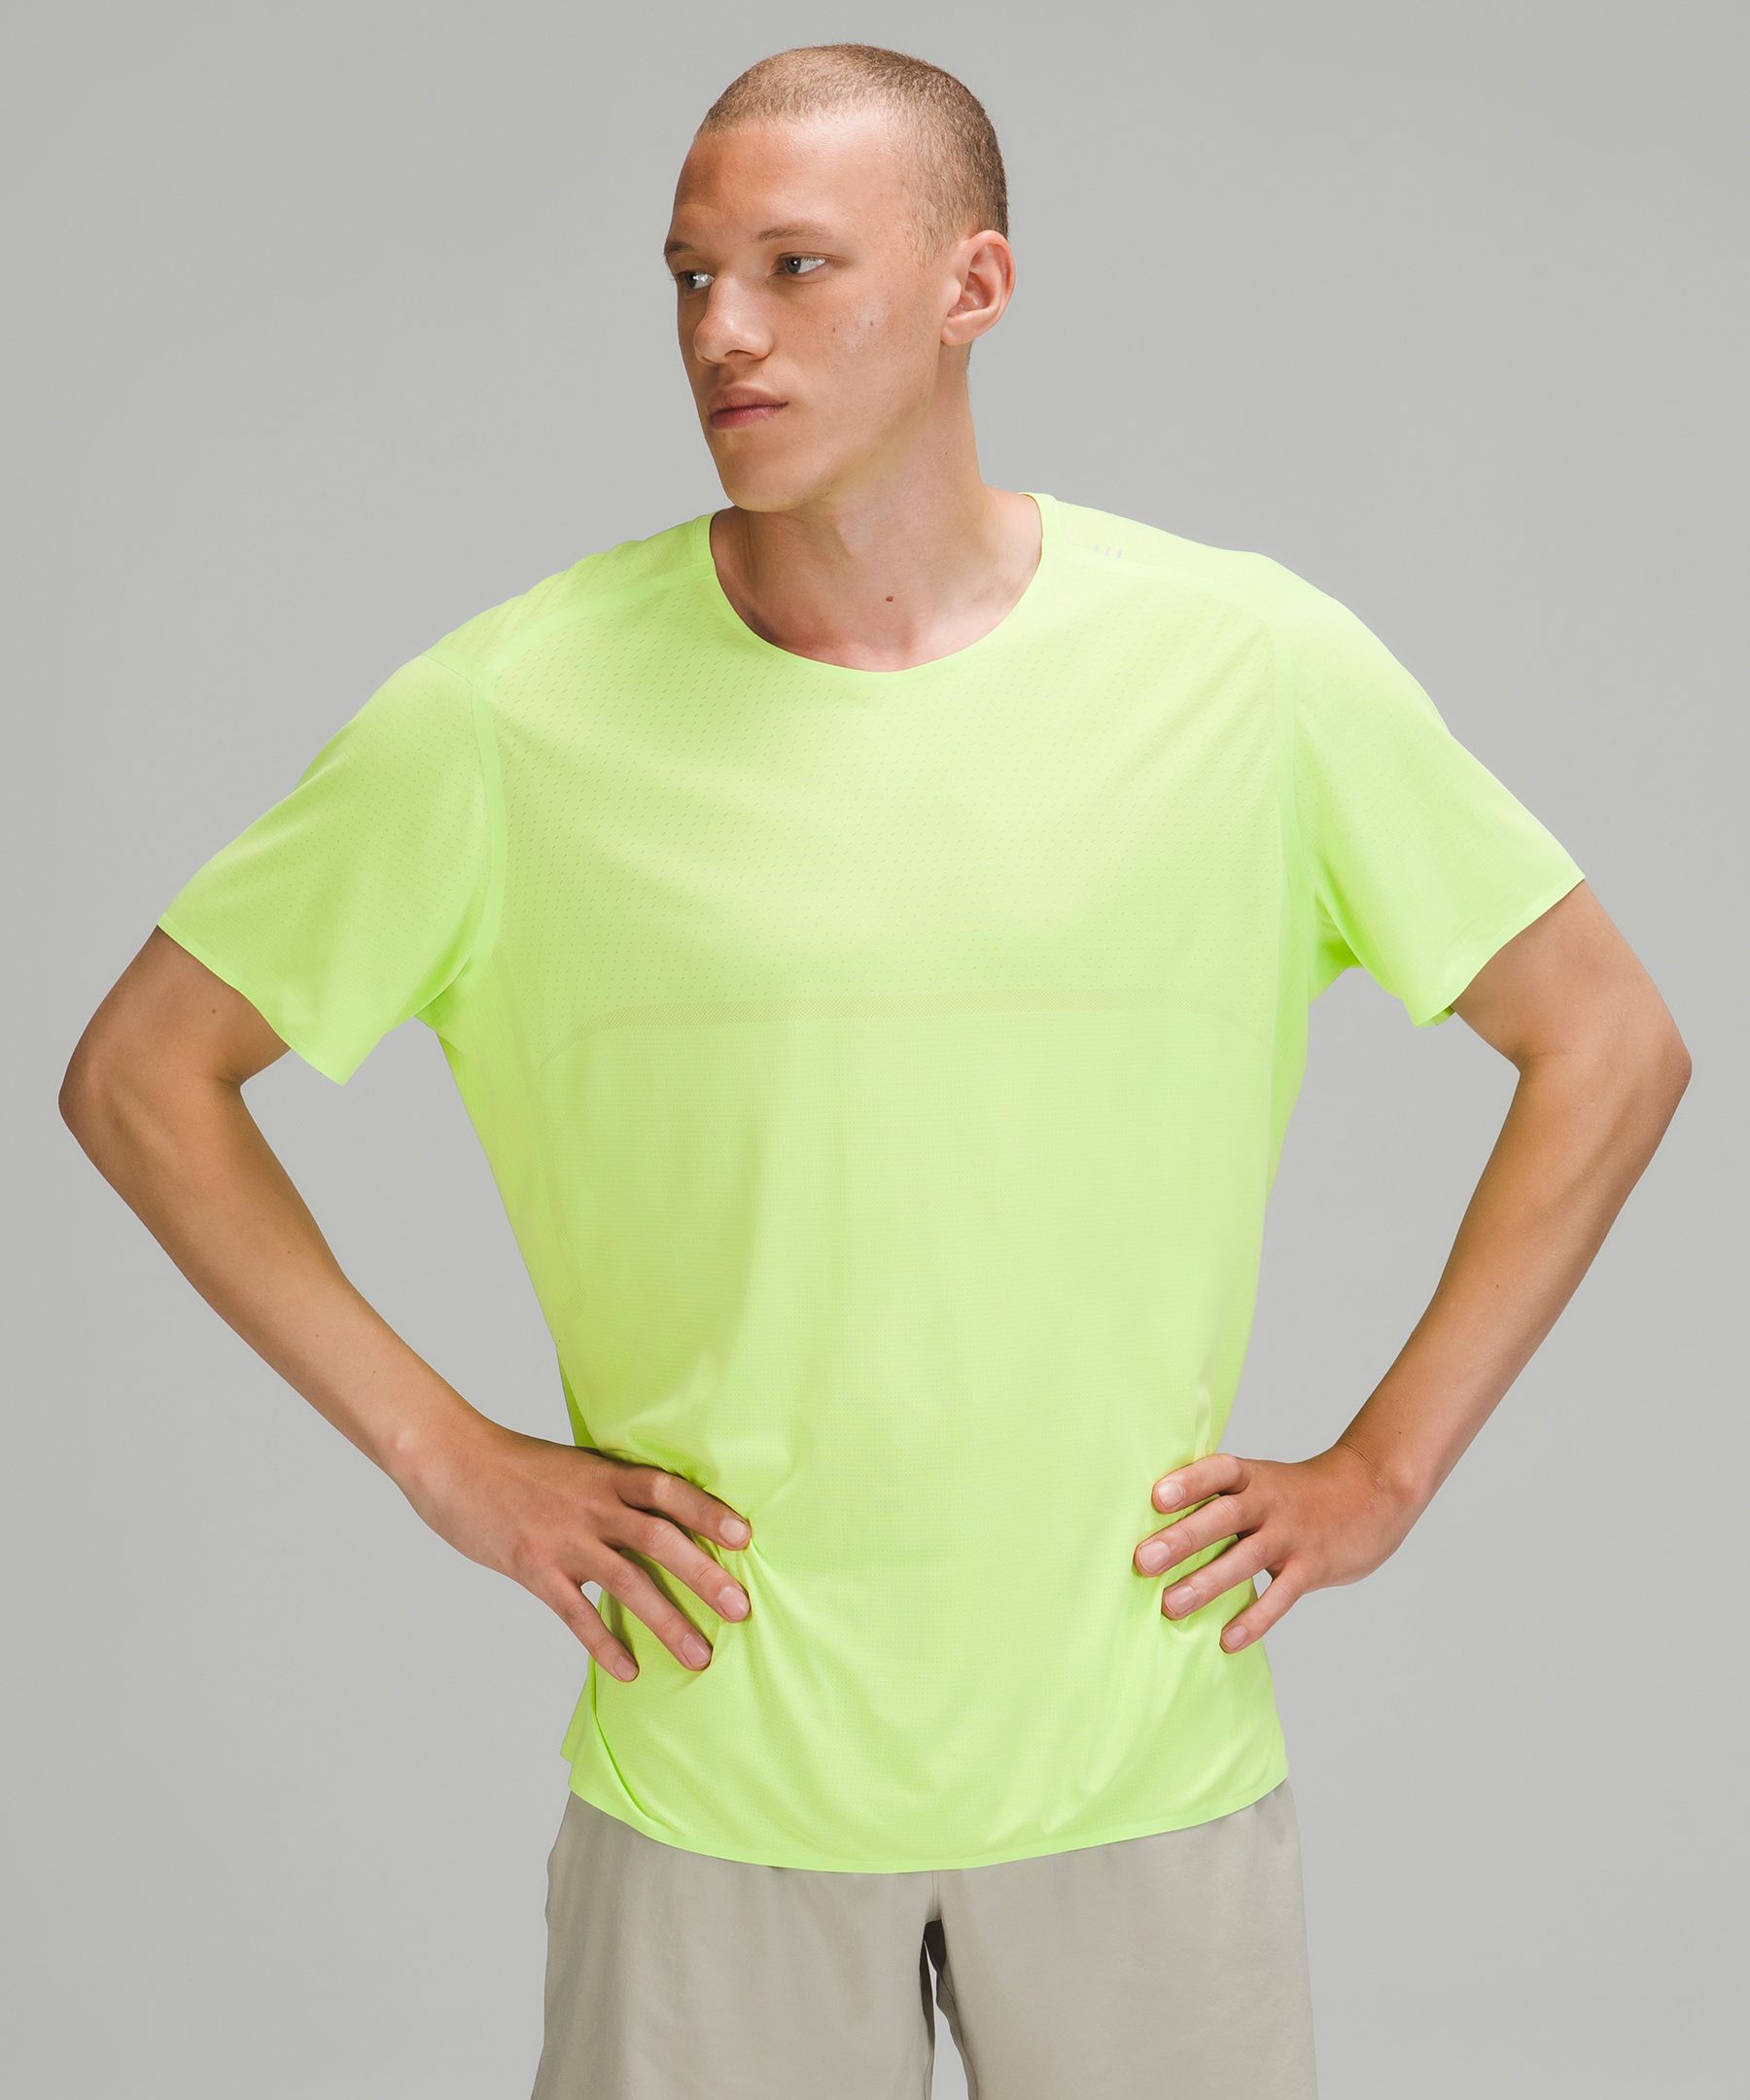 Lululemon Fast And Free Short Sleeve Shirt In Yellow